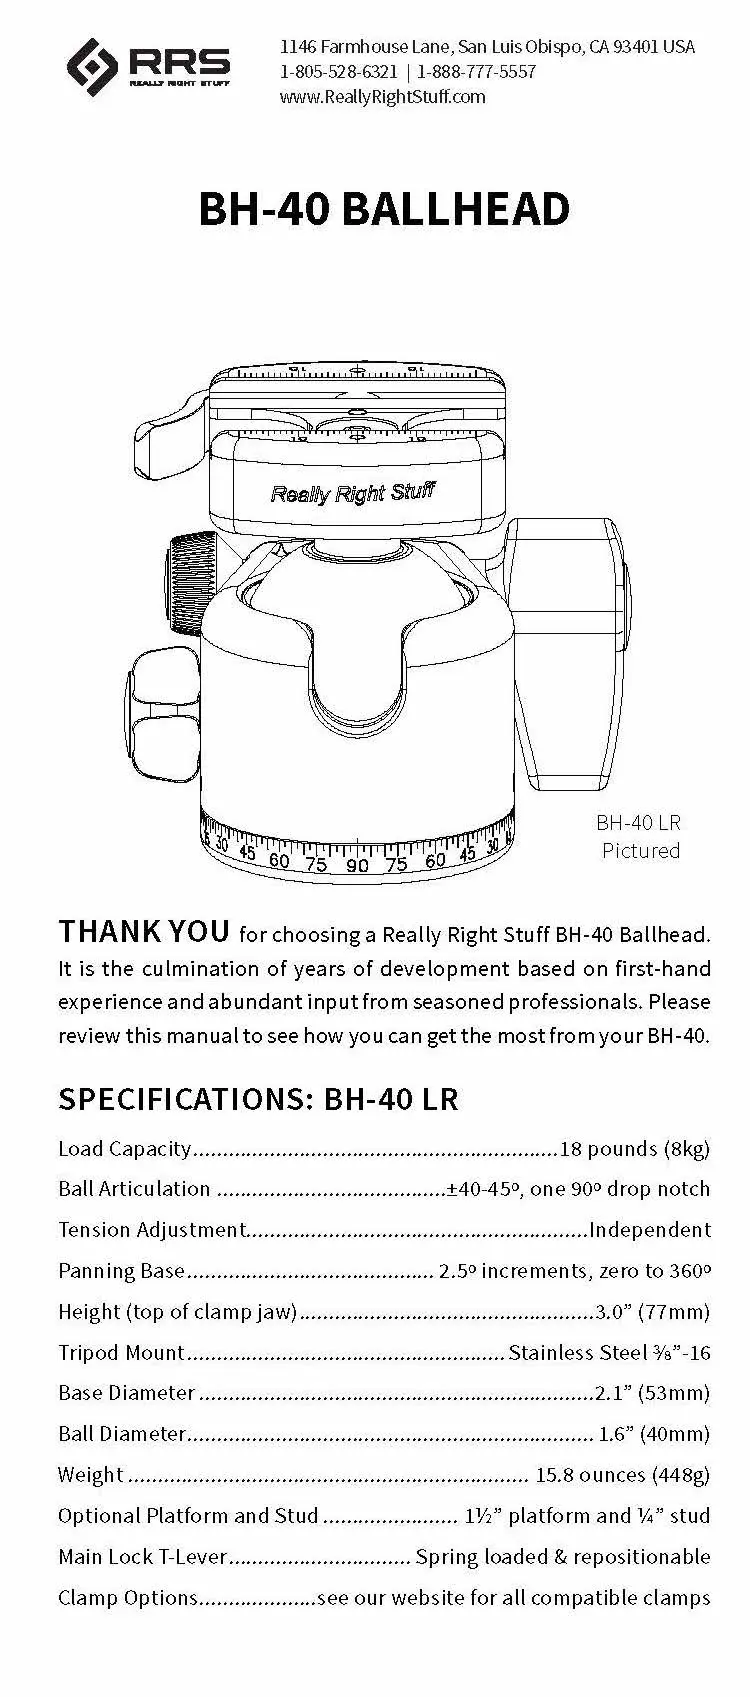 Specifications of the BH-40